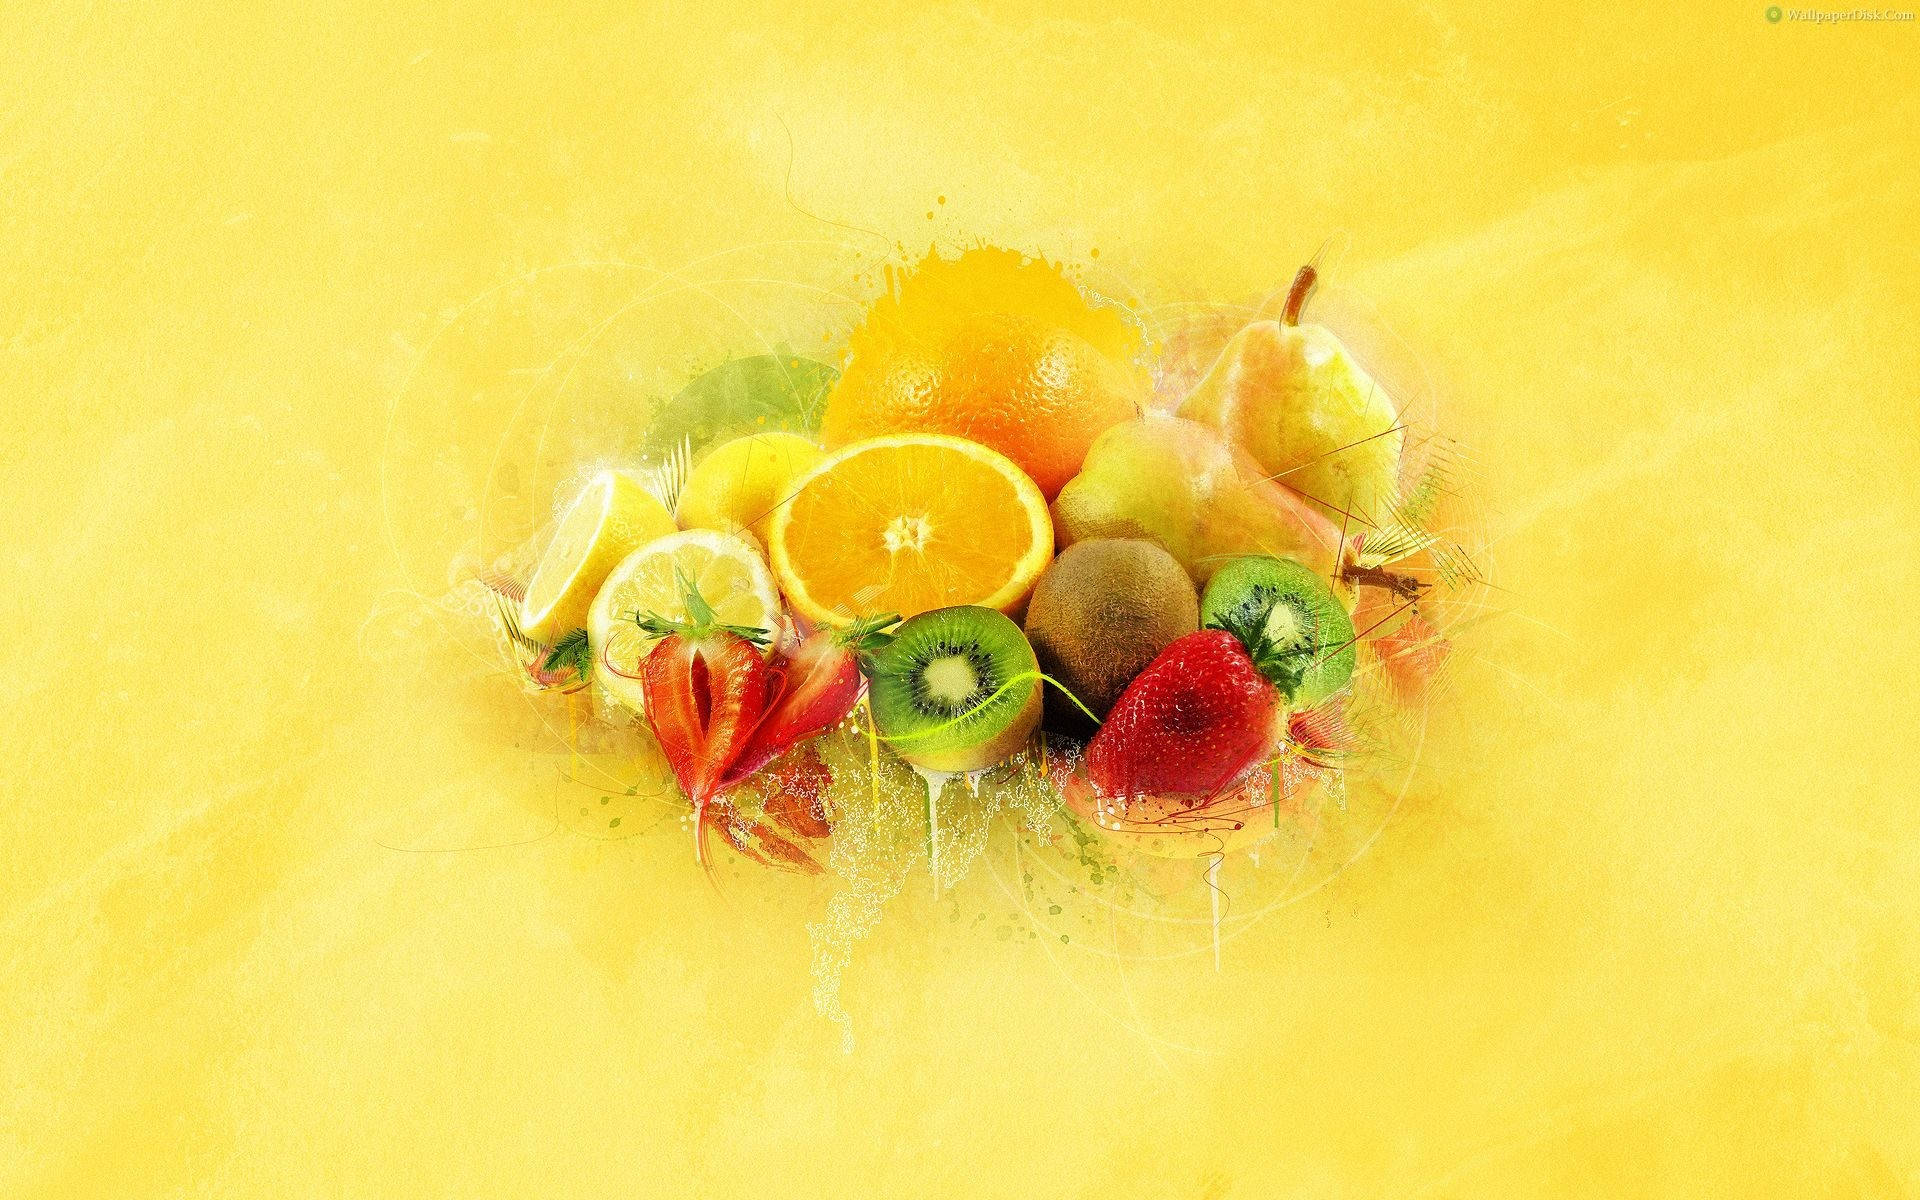 Cut Up Fruits In Yellow Background